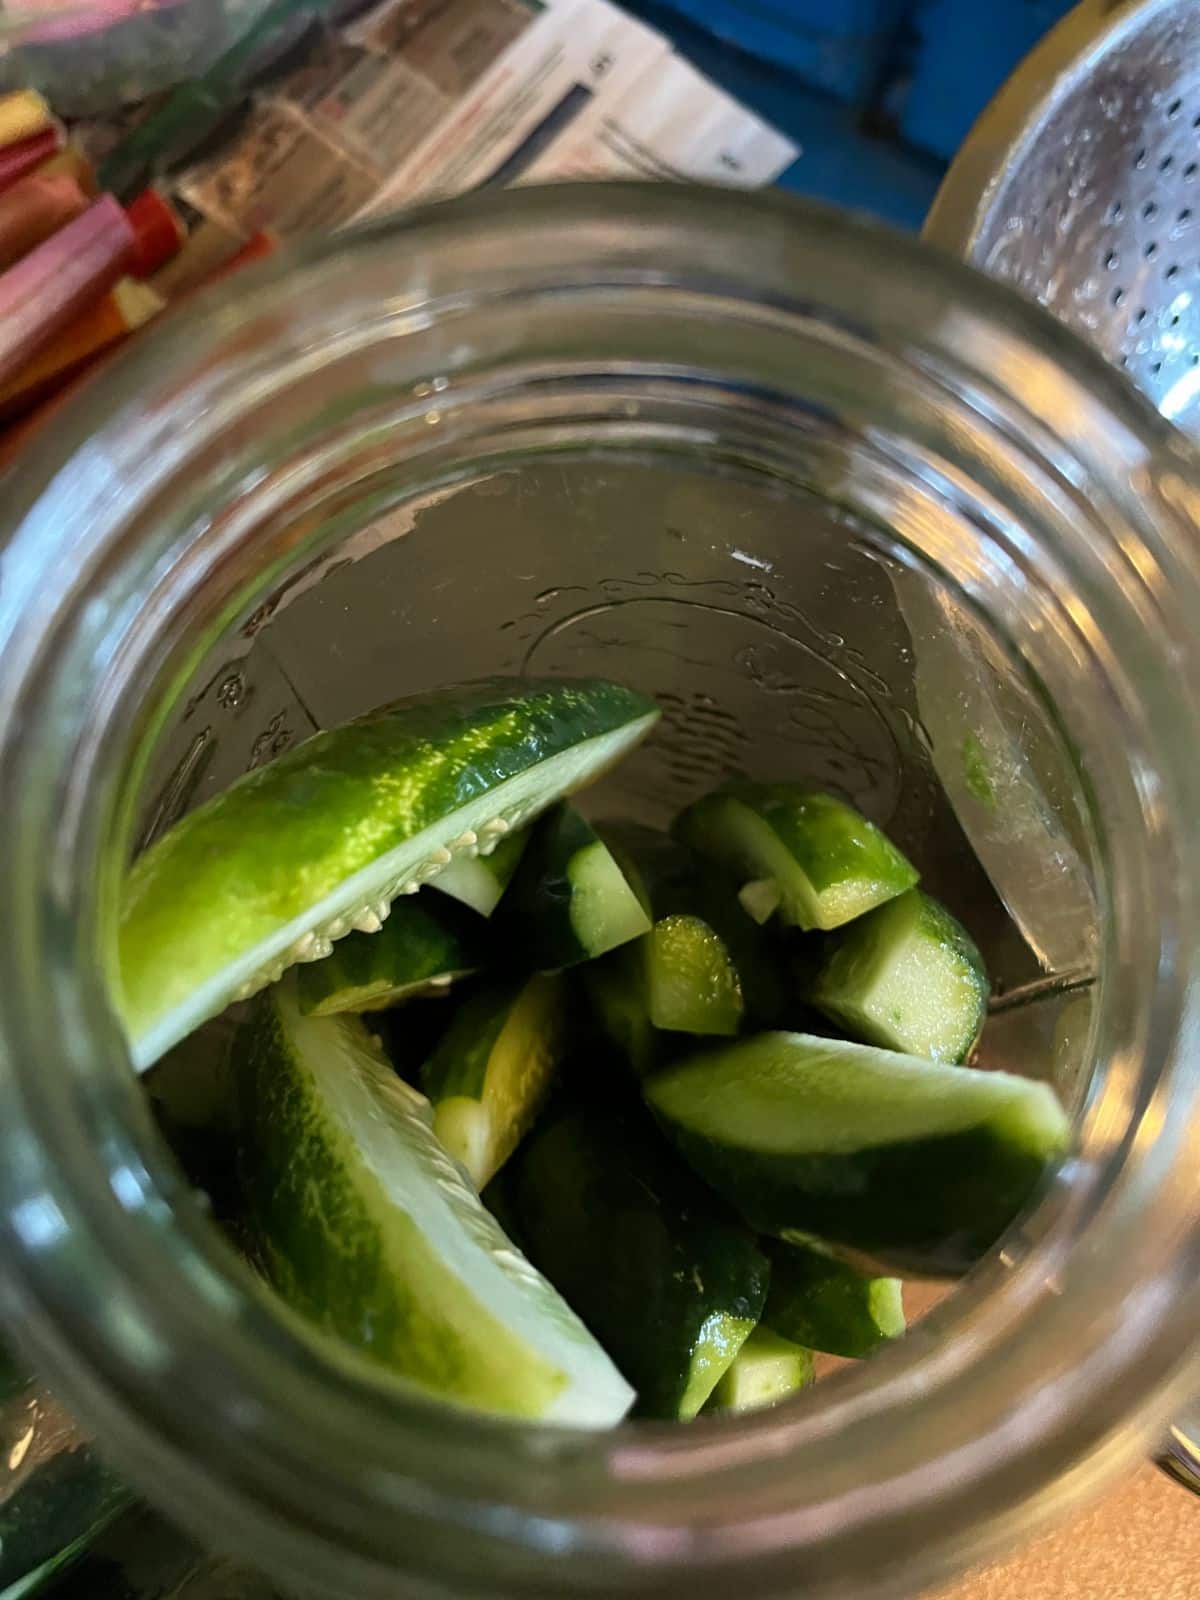 Cut cucumbers packed into a jar for pickling